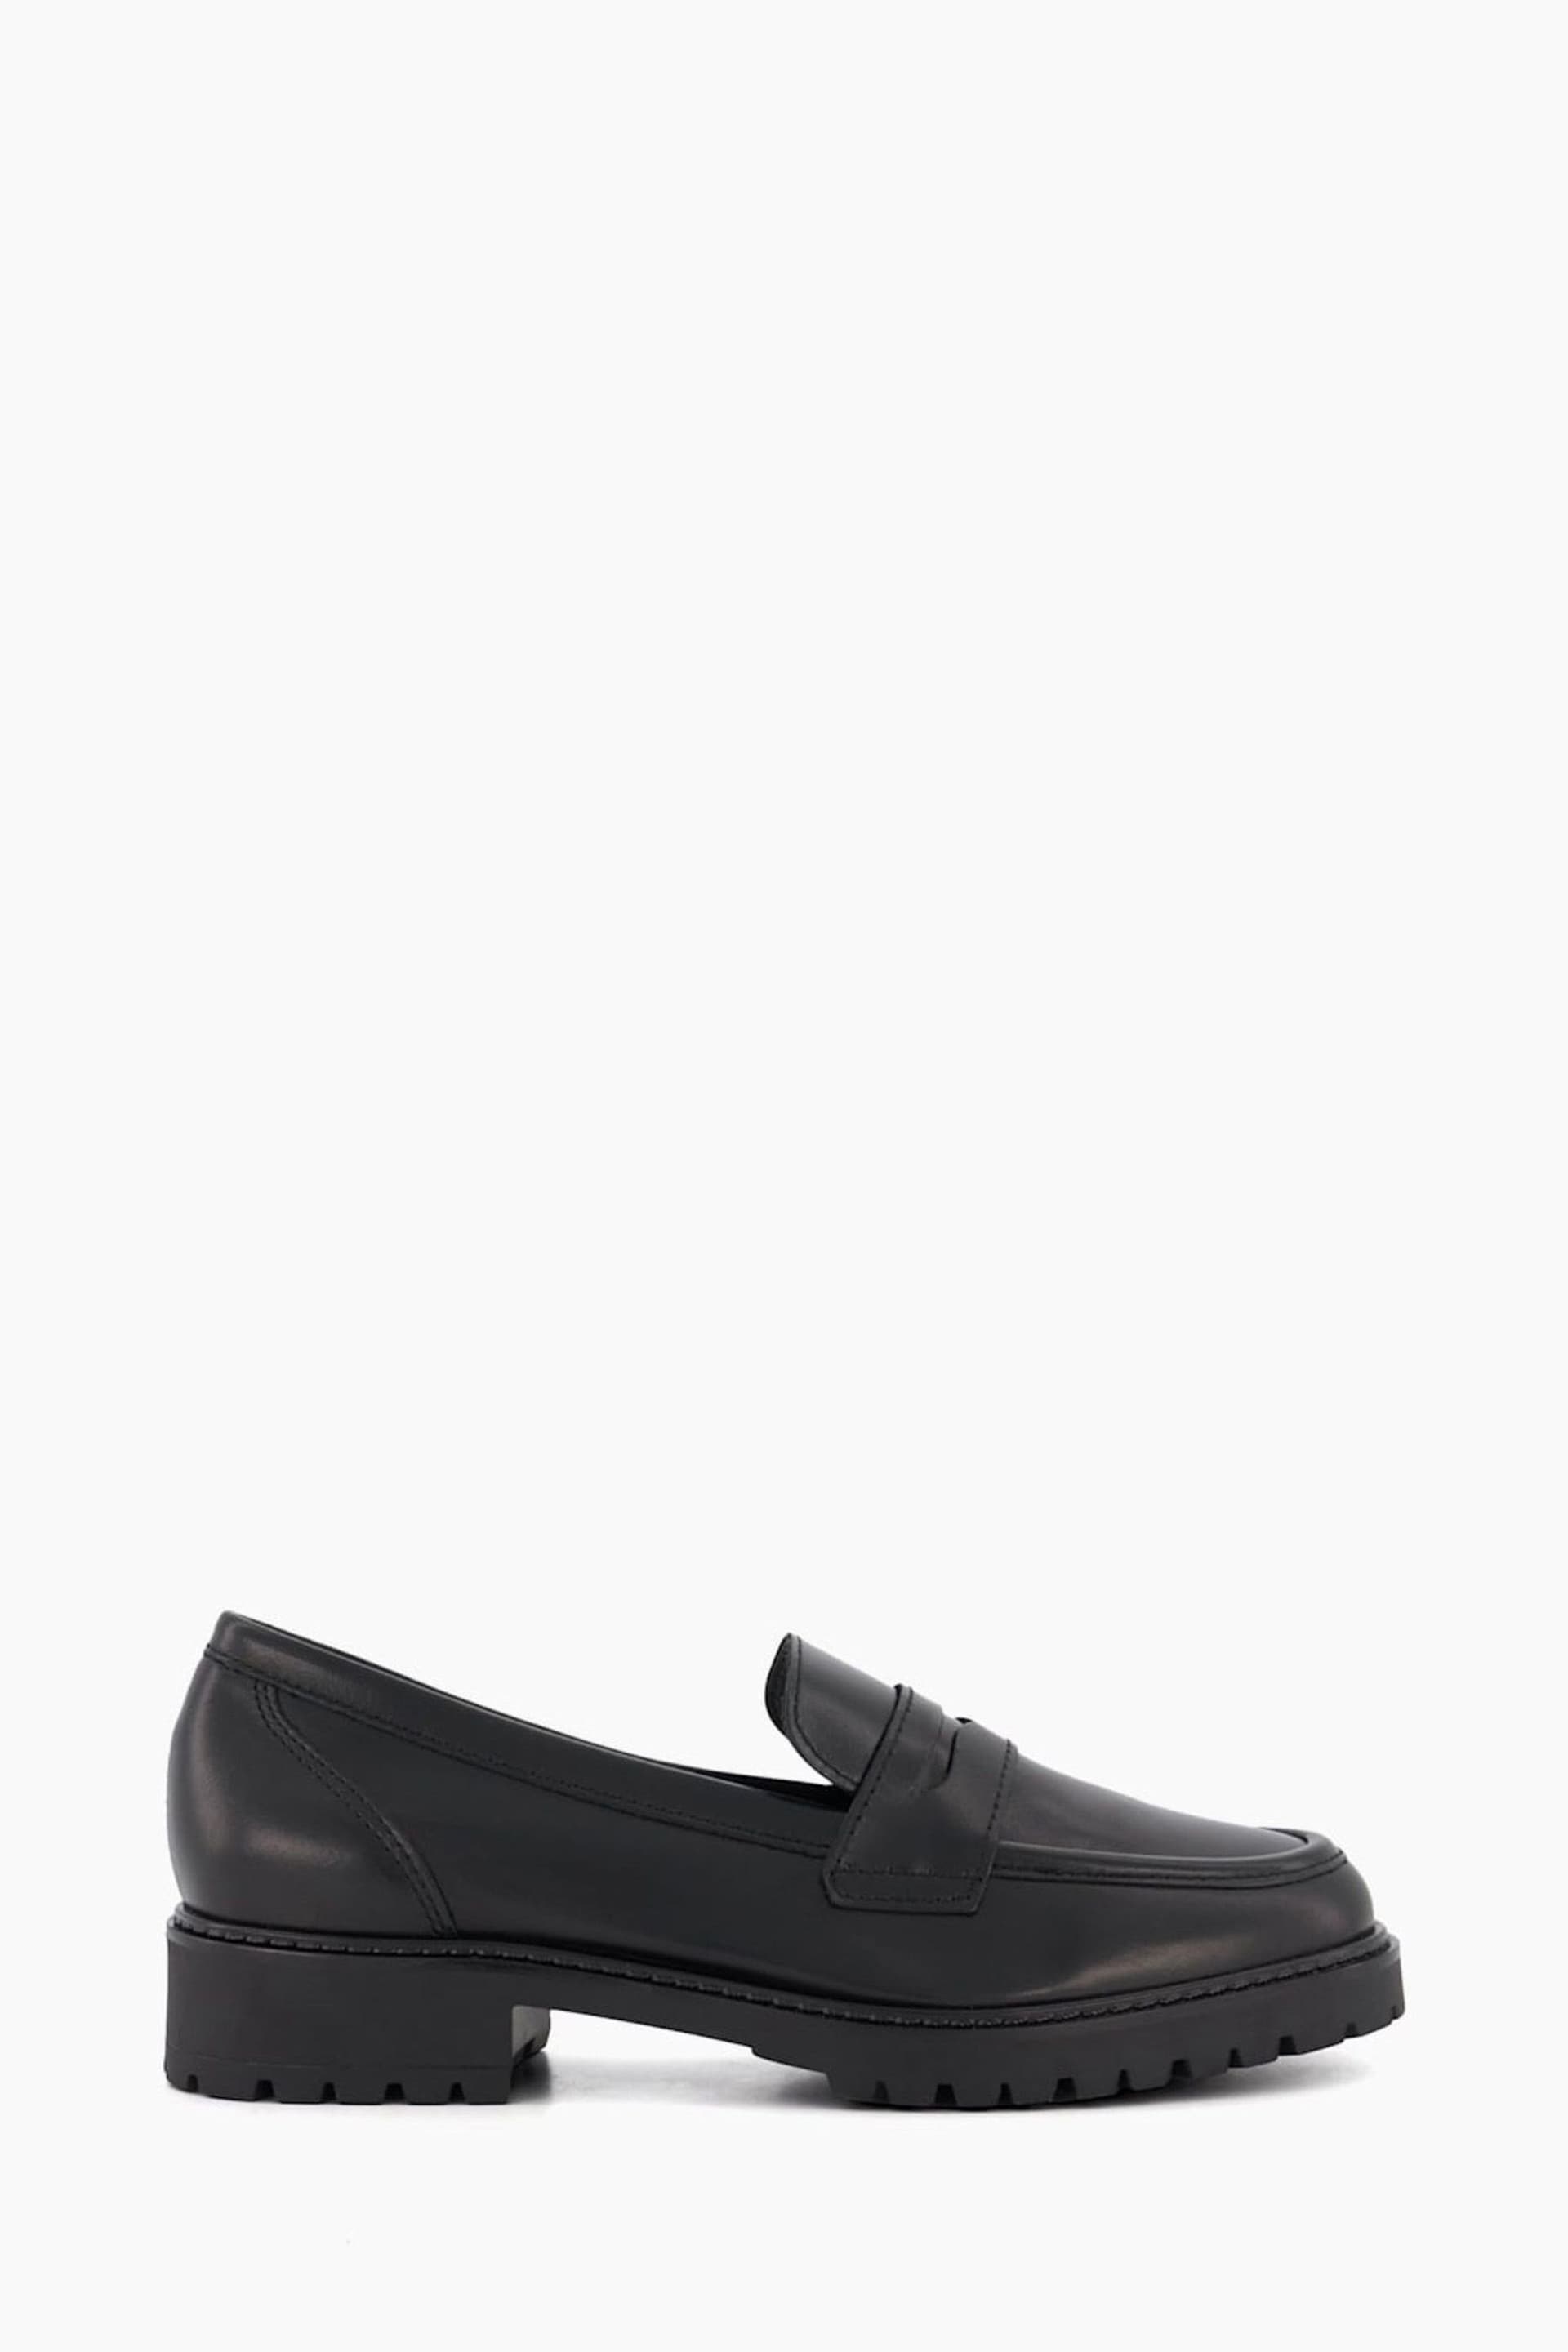 Dune London Black Gild Cleated Penny Loafers - Image 1 of 6